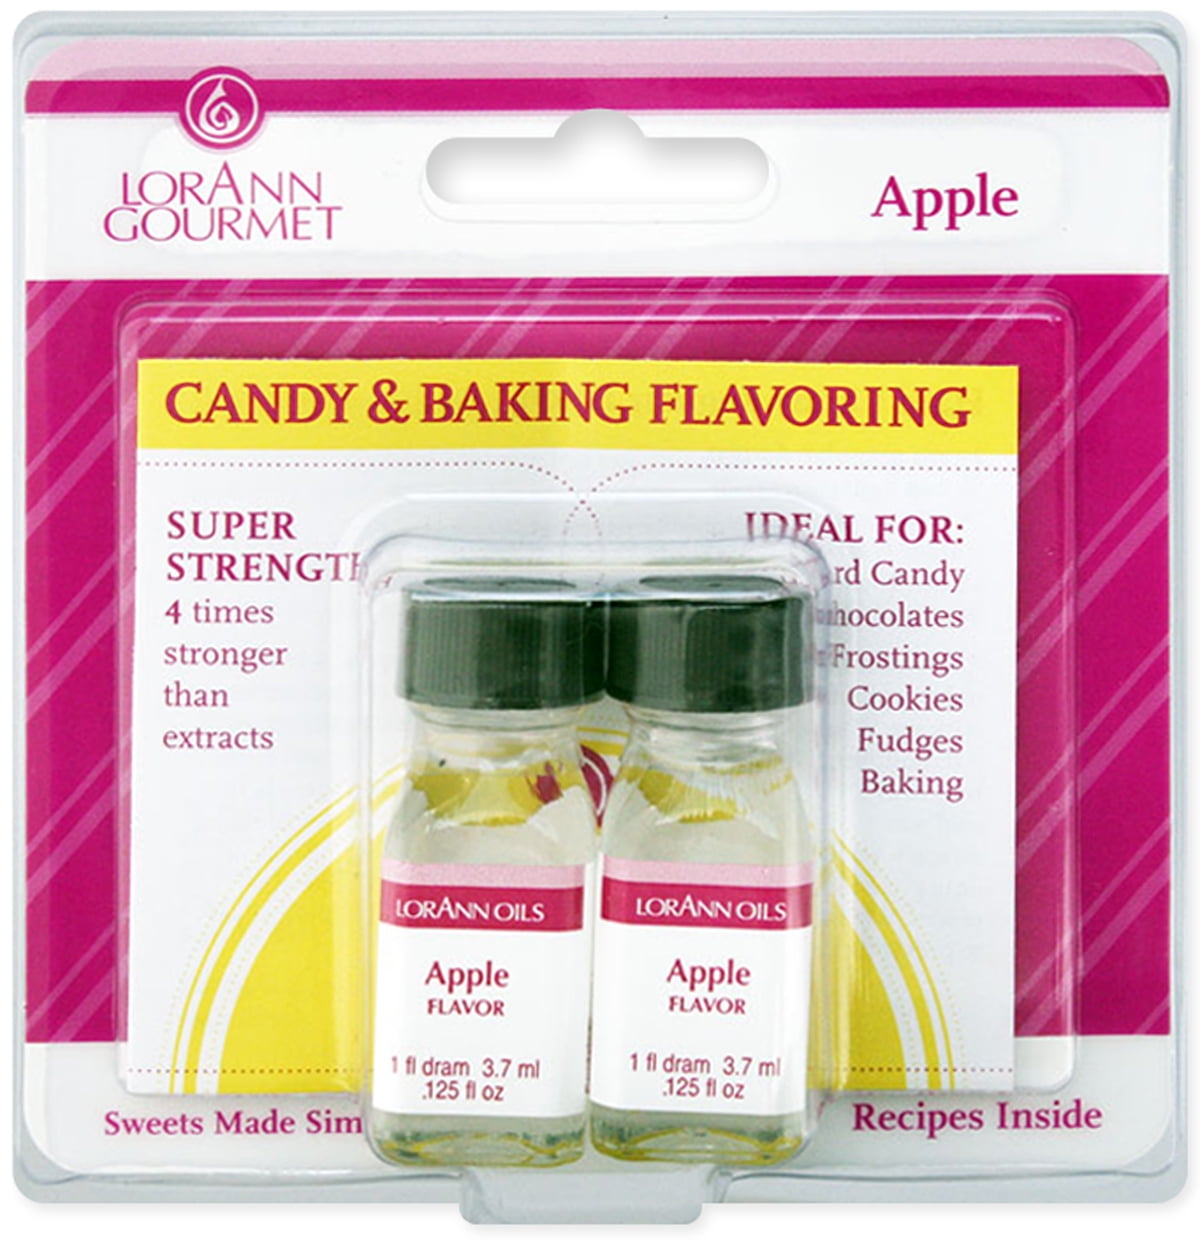 NEW/BEVERAGES FLAVORS, 1 Dram Extra Strength Candy Oil. Great for Baking,  Cooking, Lip Glosses and More. 